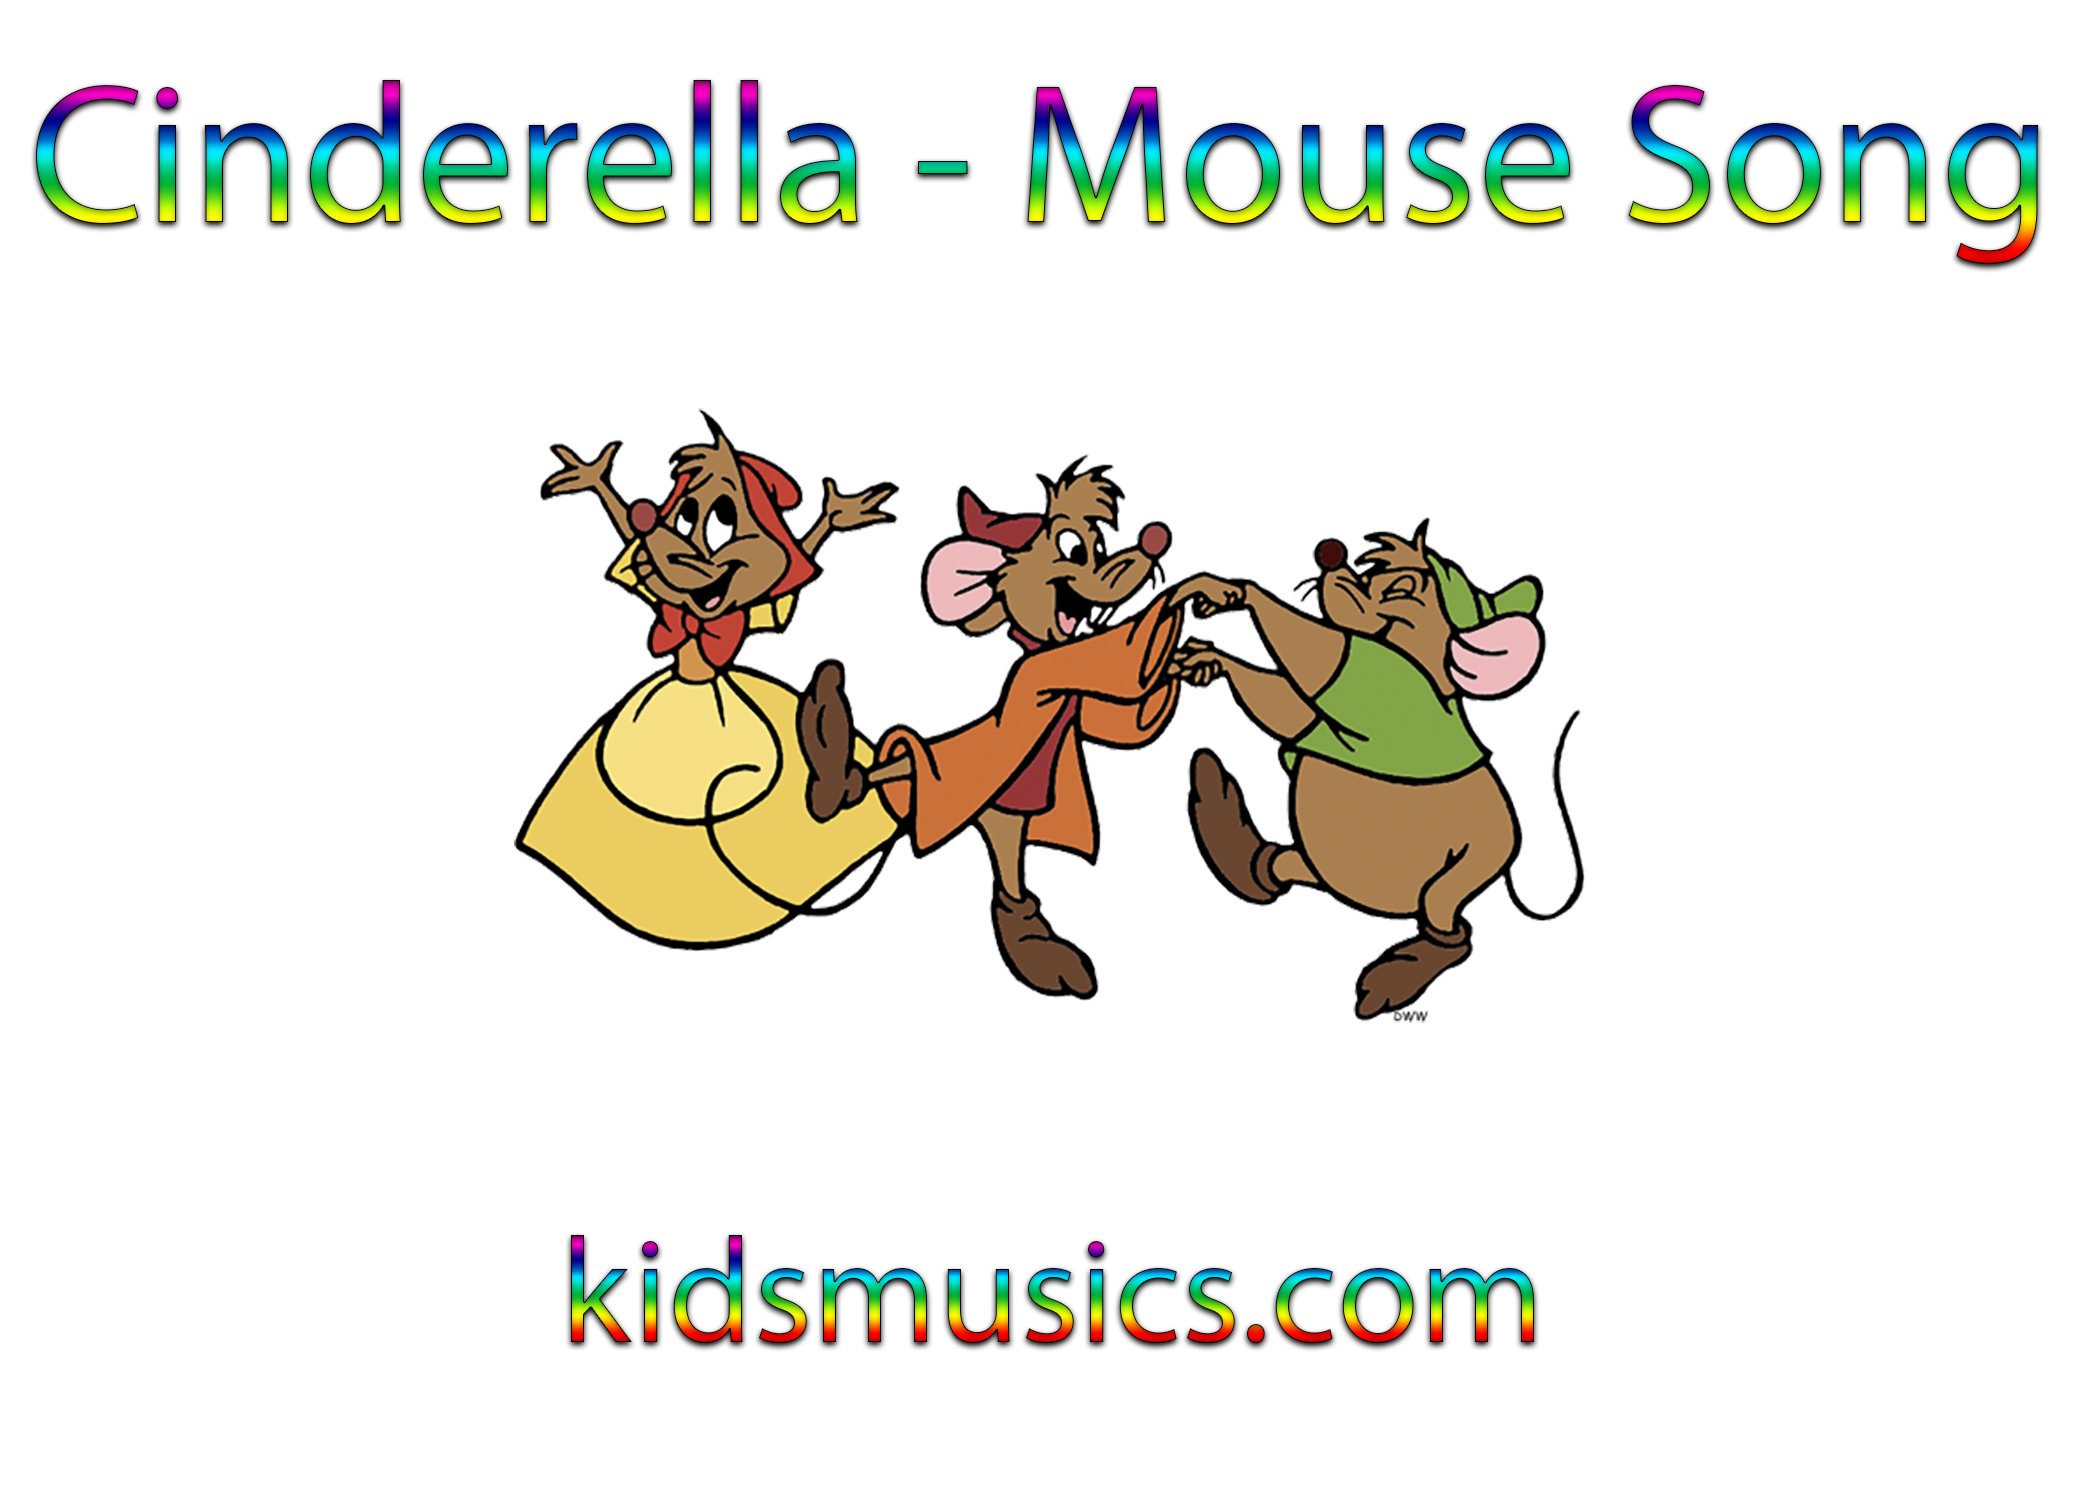 Kidsmusics Download Cinderella Mouse Song Free Mp3 Zip Archive Flac